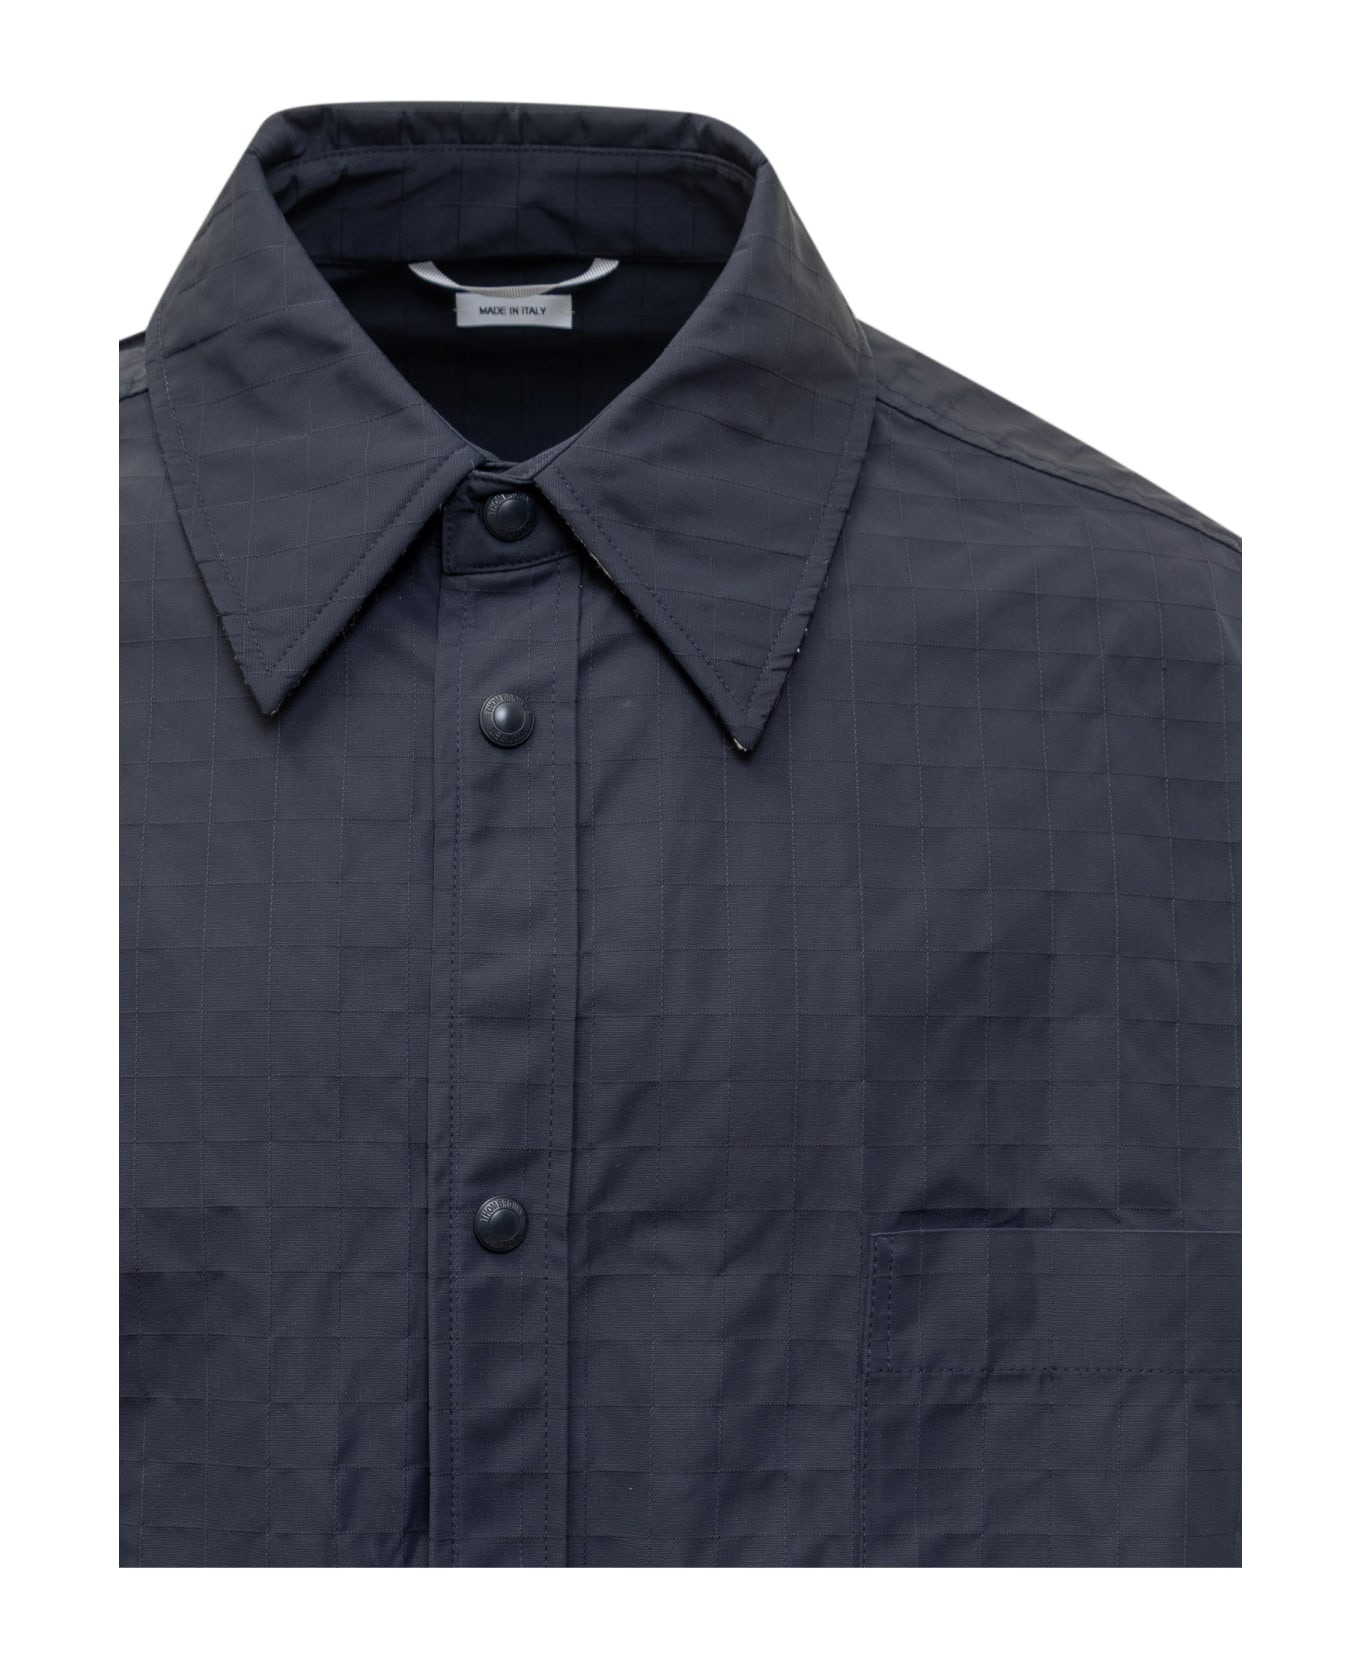 Thom Browne Oversize Shirt With Stitching - NAVY